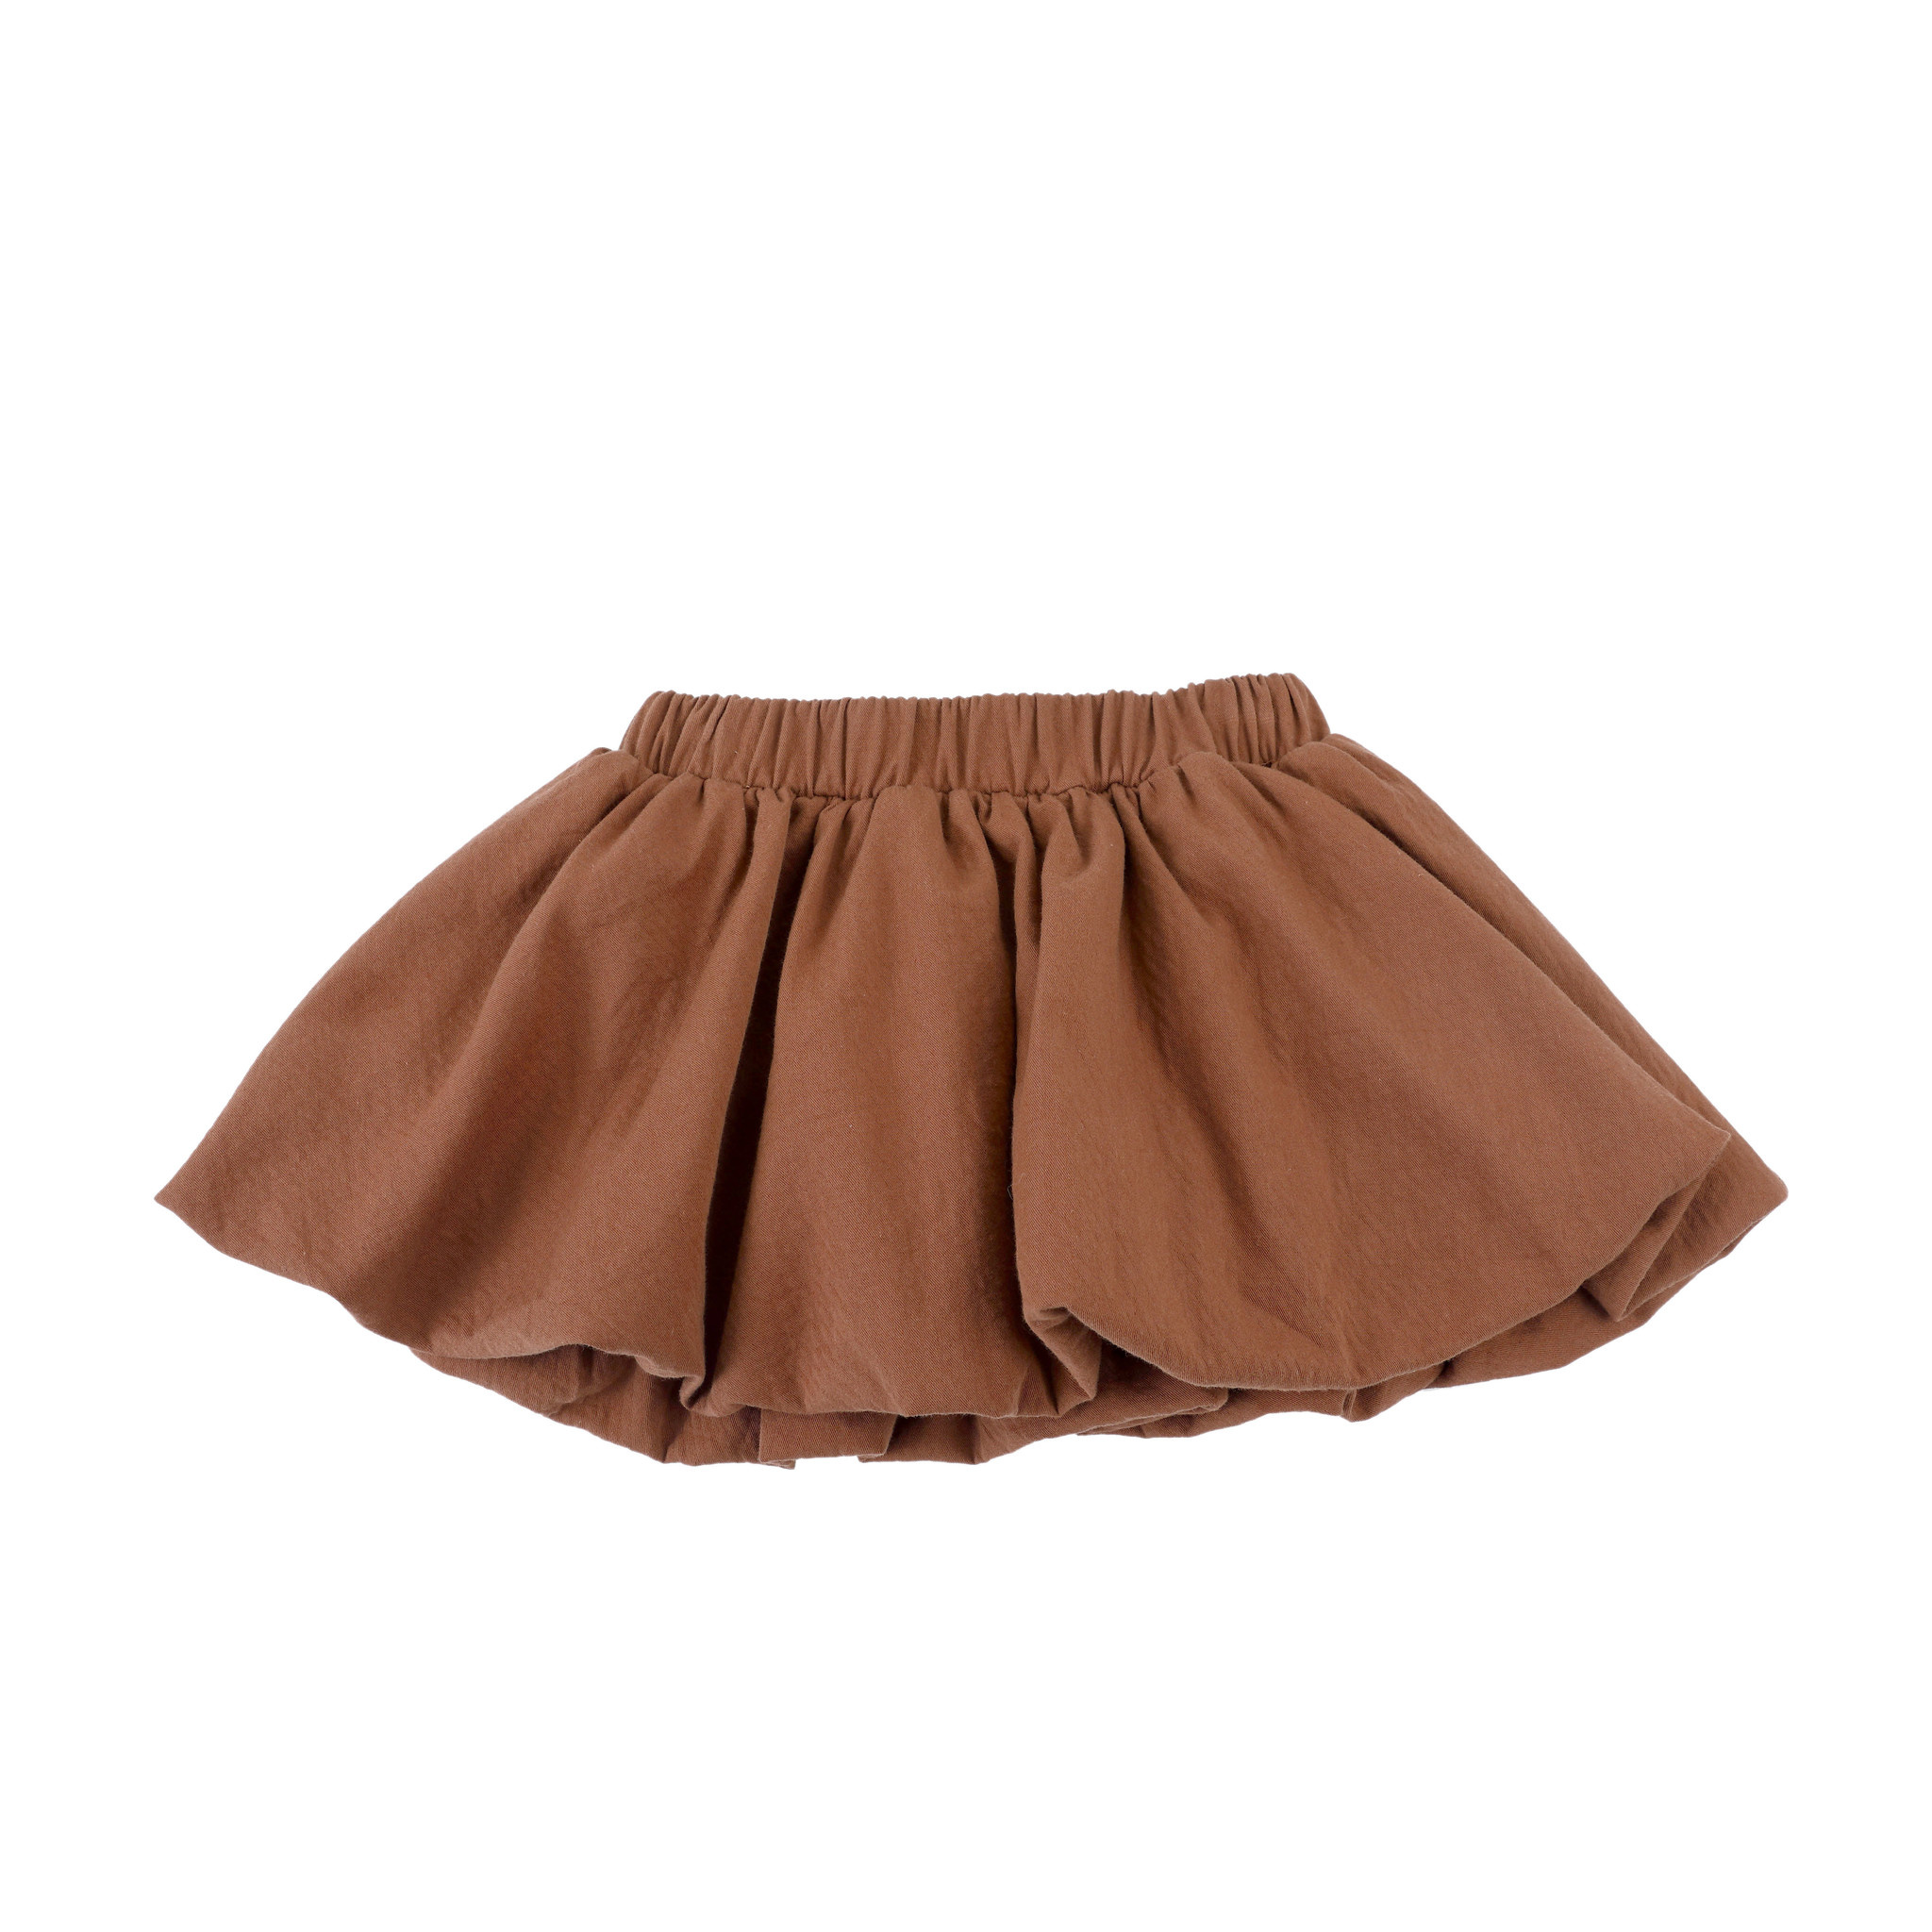 Justine Skirt - Rusty Coral-4